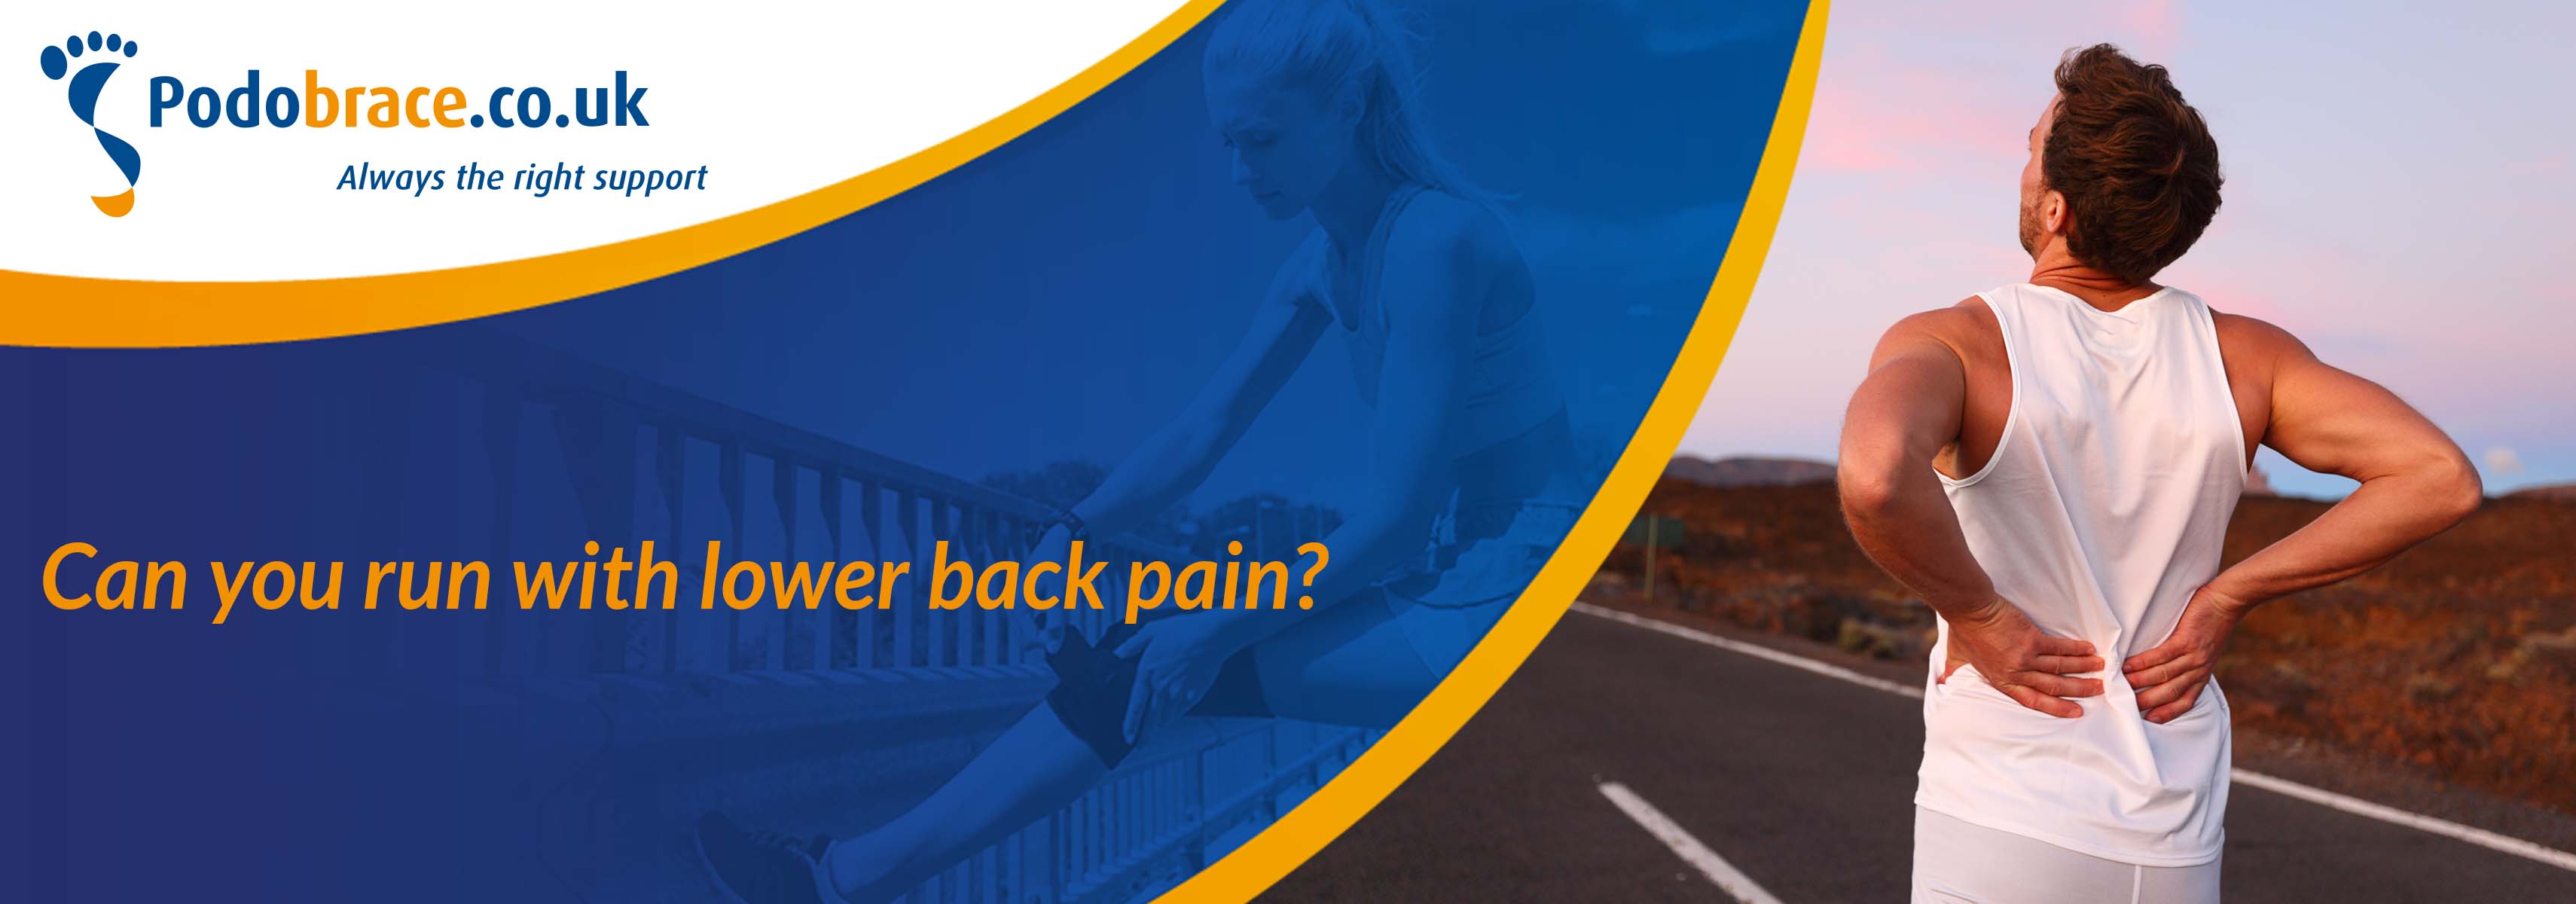 Can you run with lower back pain